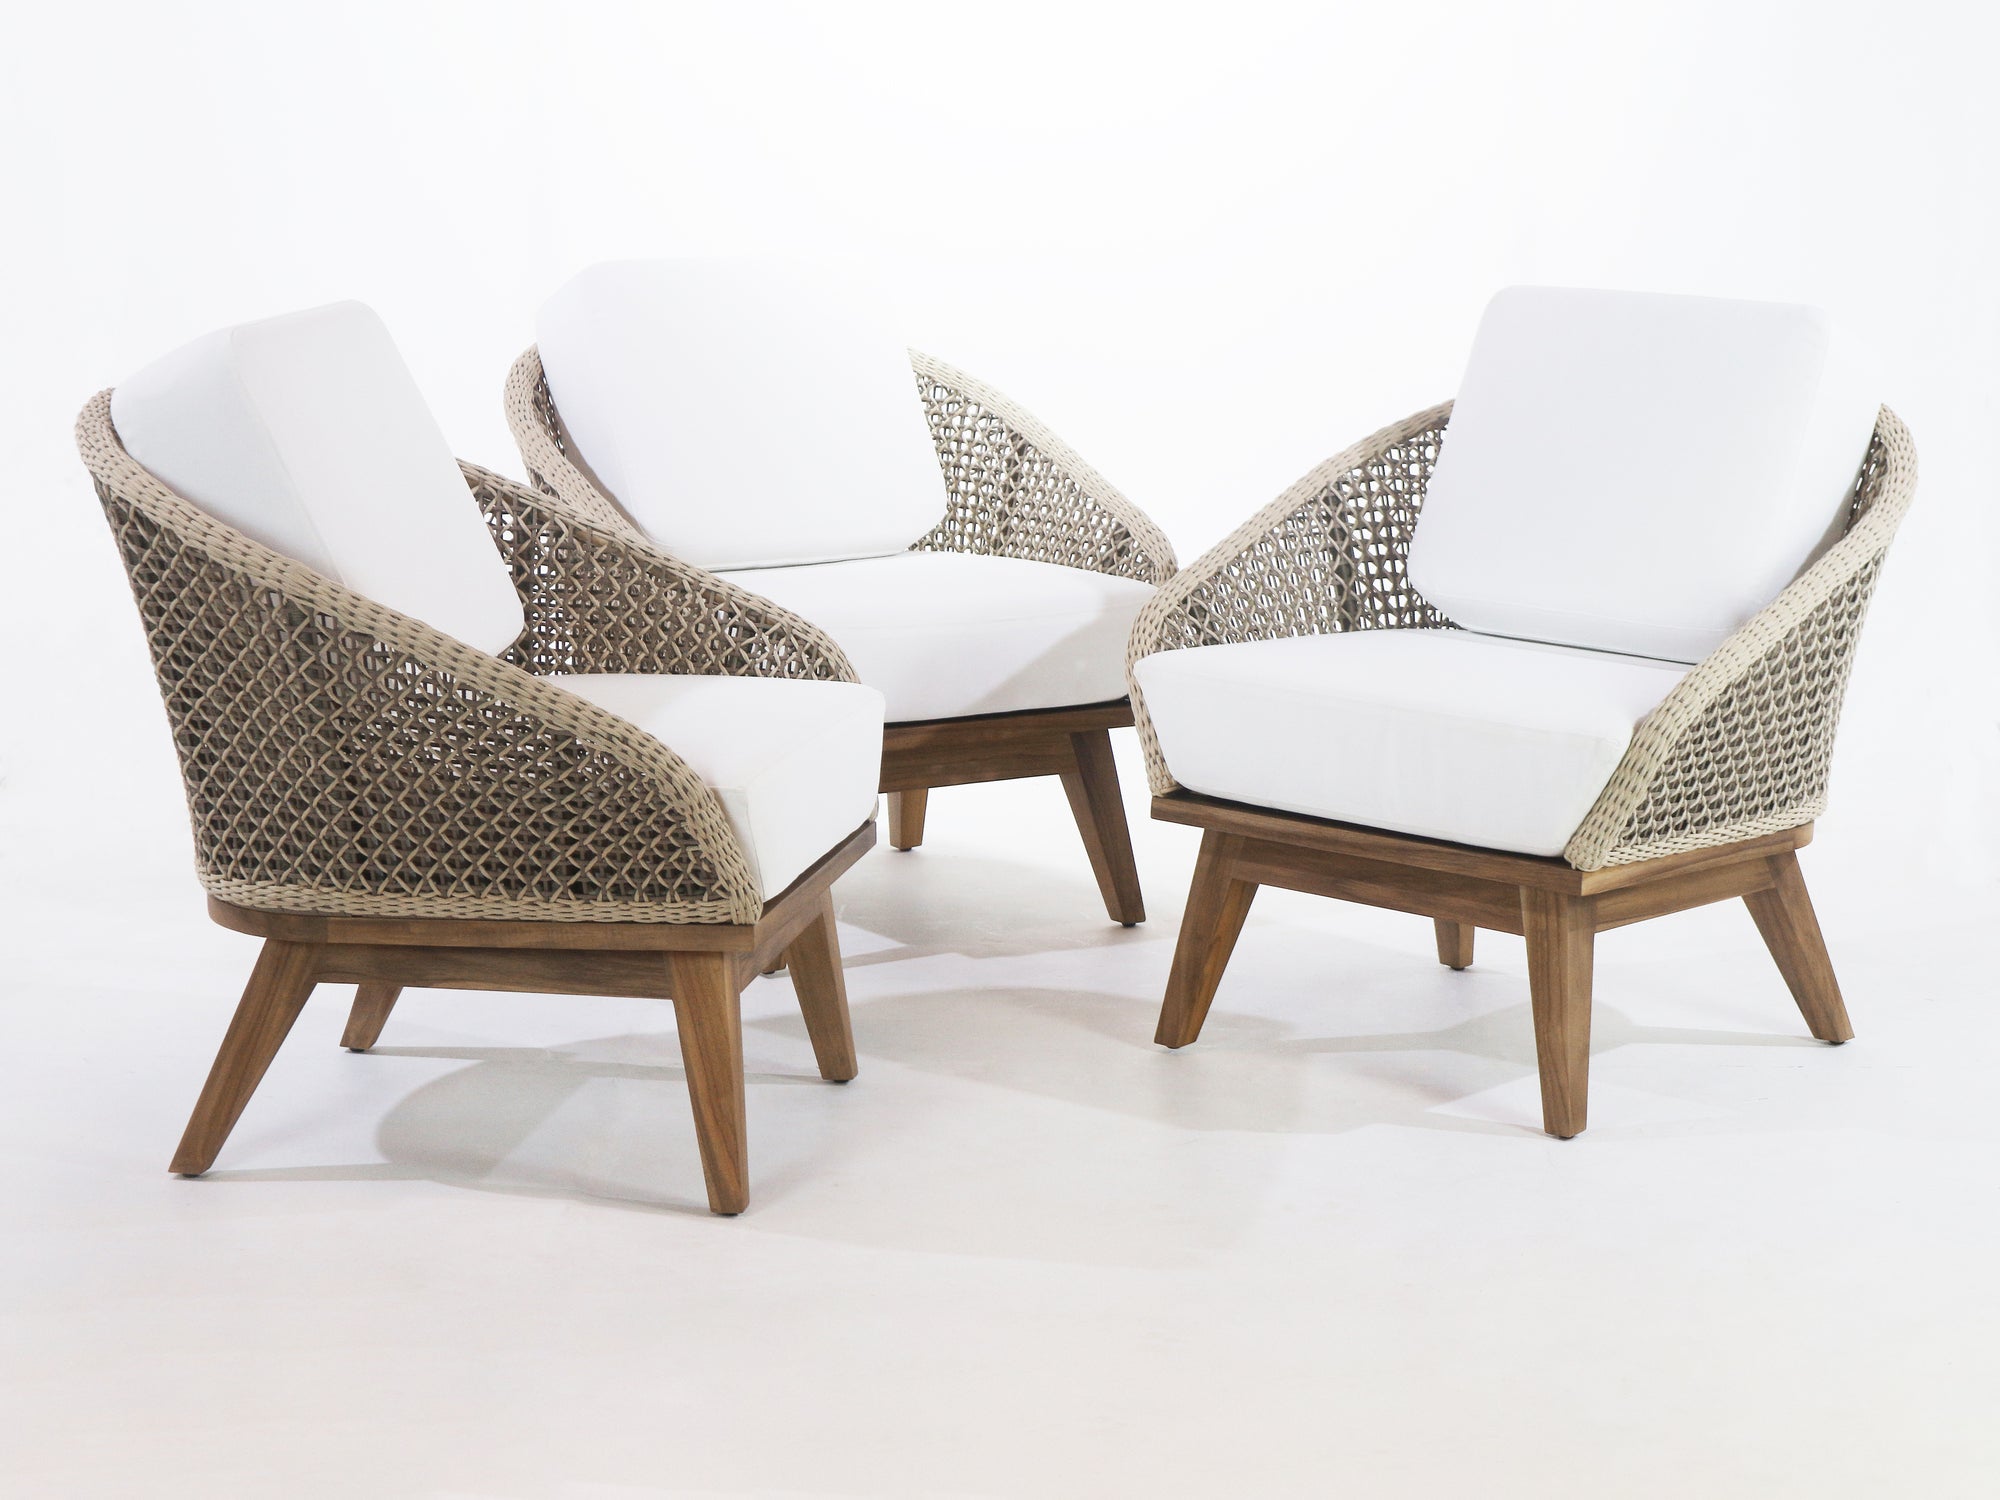 Surakarta Outdoor Accent Chair with UV protected outdoor weaving